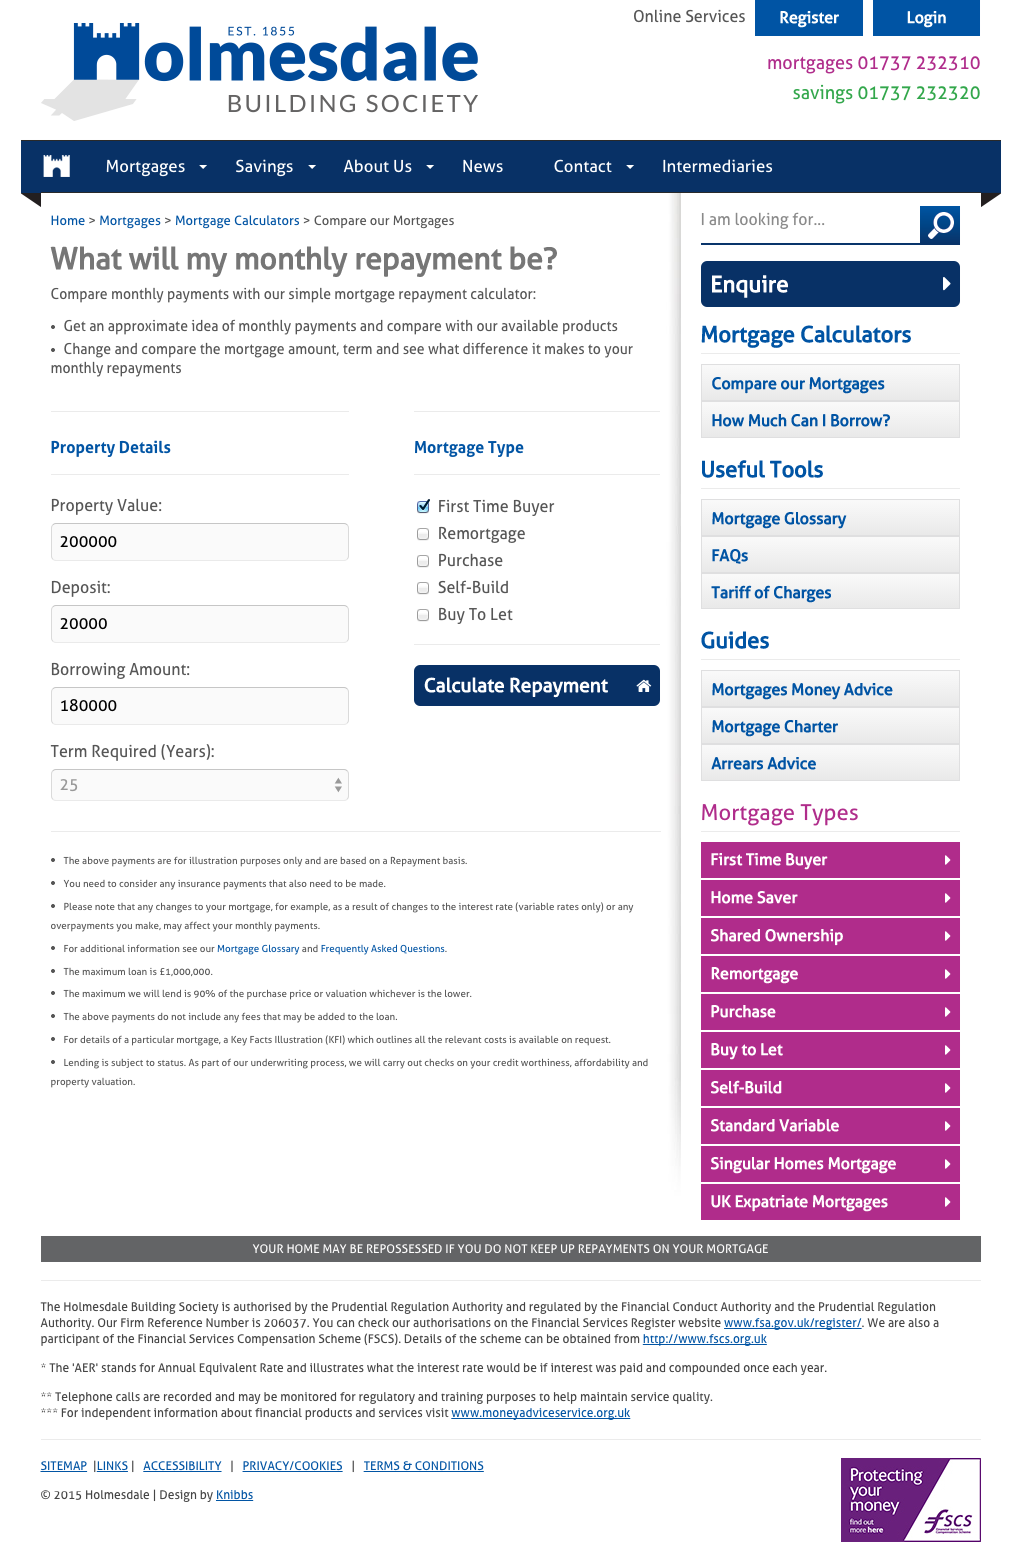 Compare Our Mortgages   Holmesdale Building Society.png